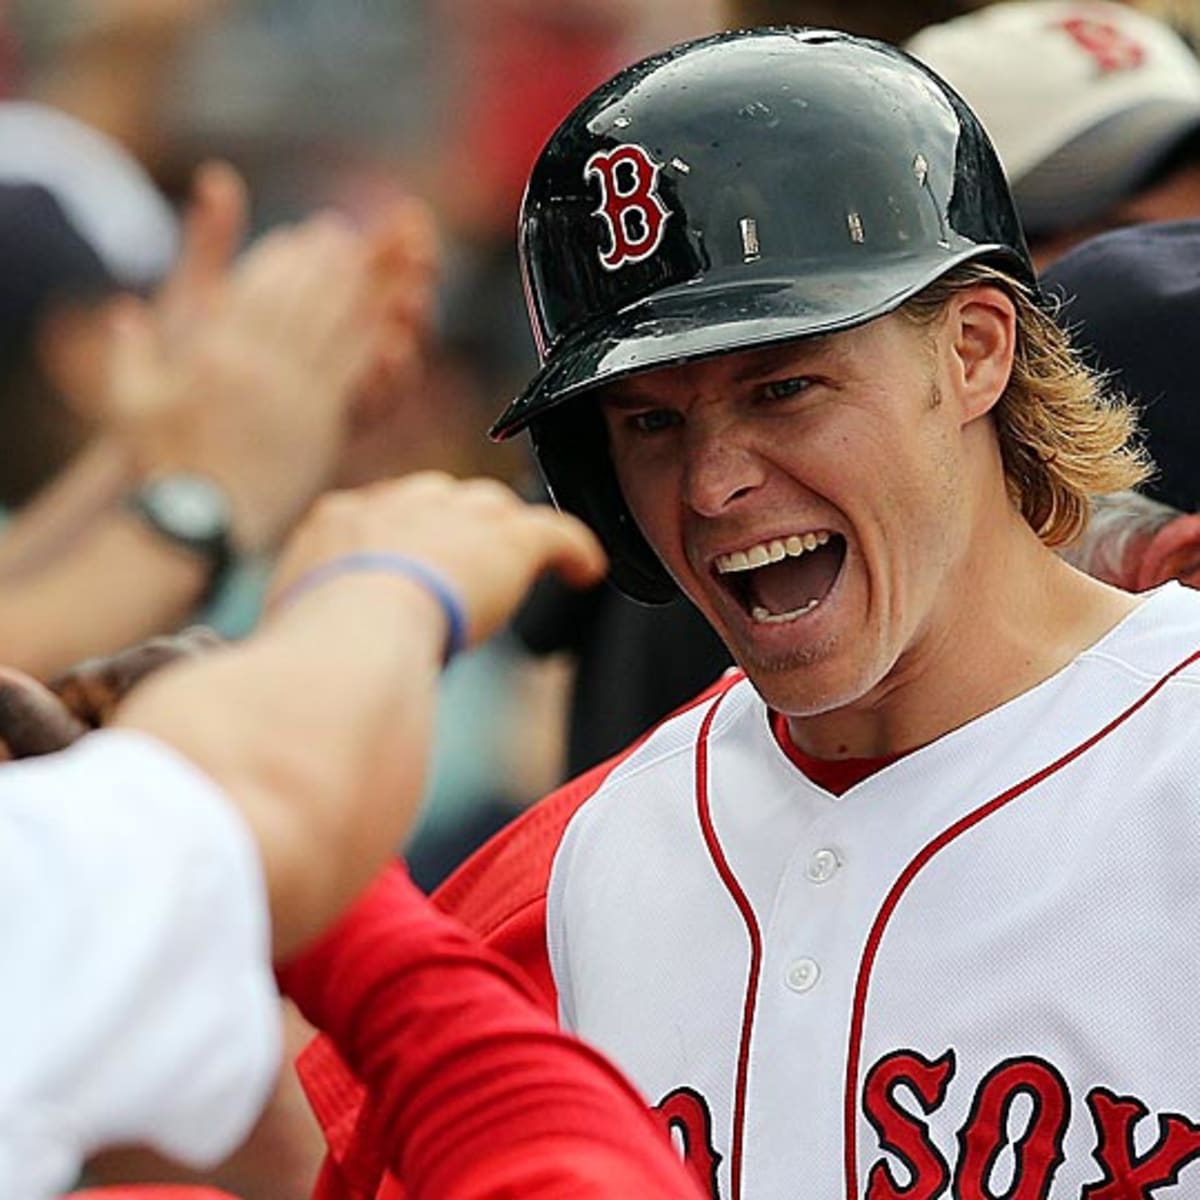 Brock Holt hits a go-ahead homer in the ninth to give the Red Sox a win  over the Padres - Over the Monster